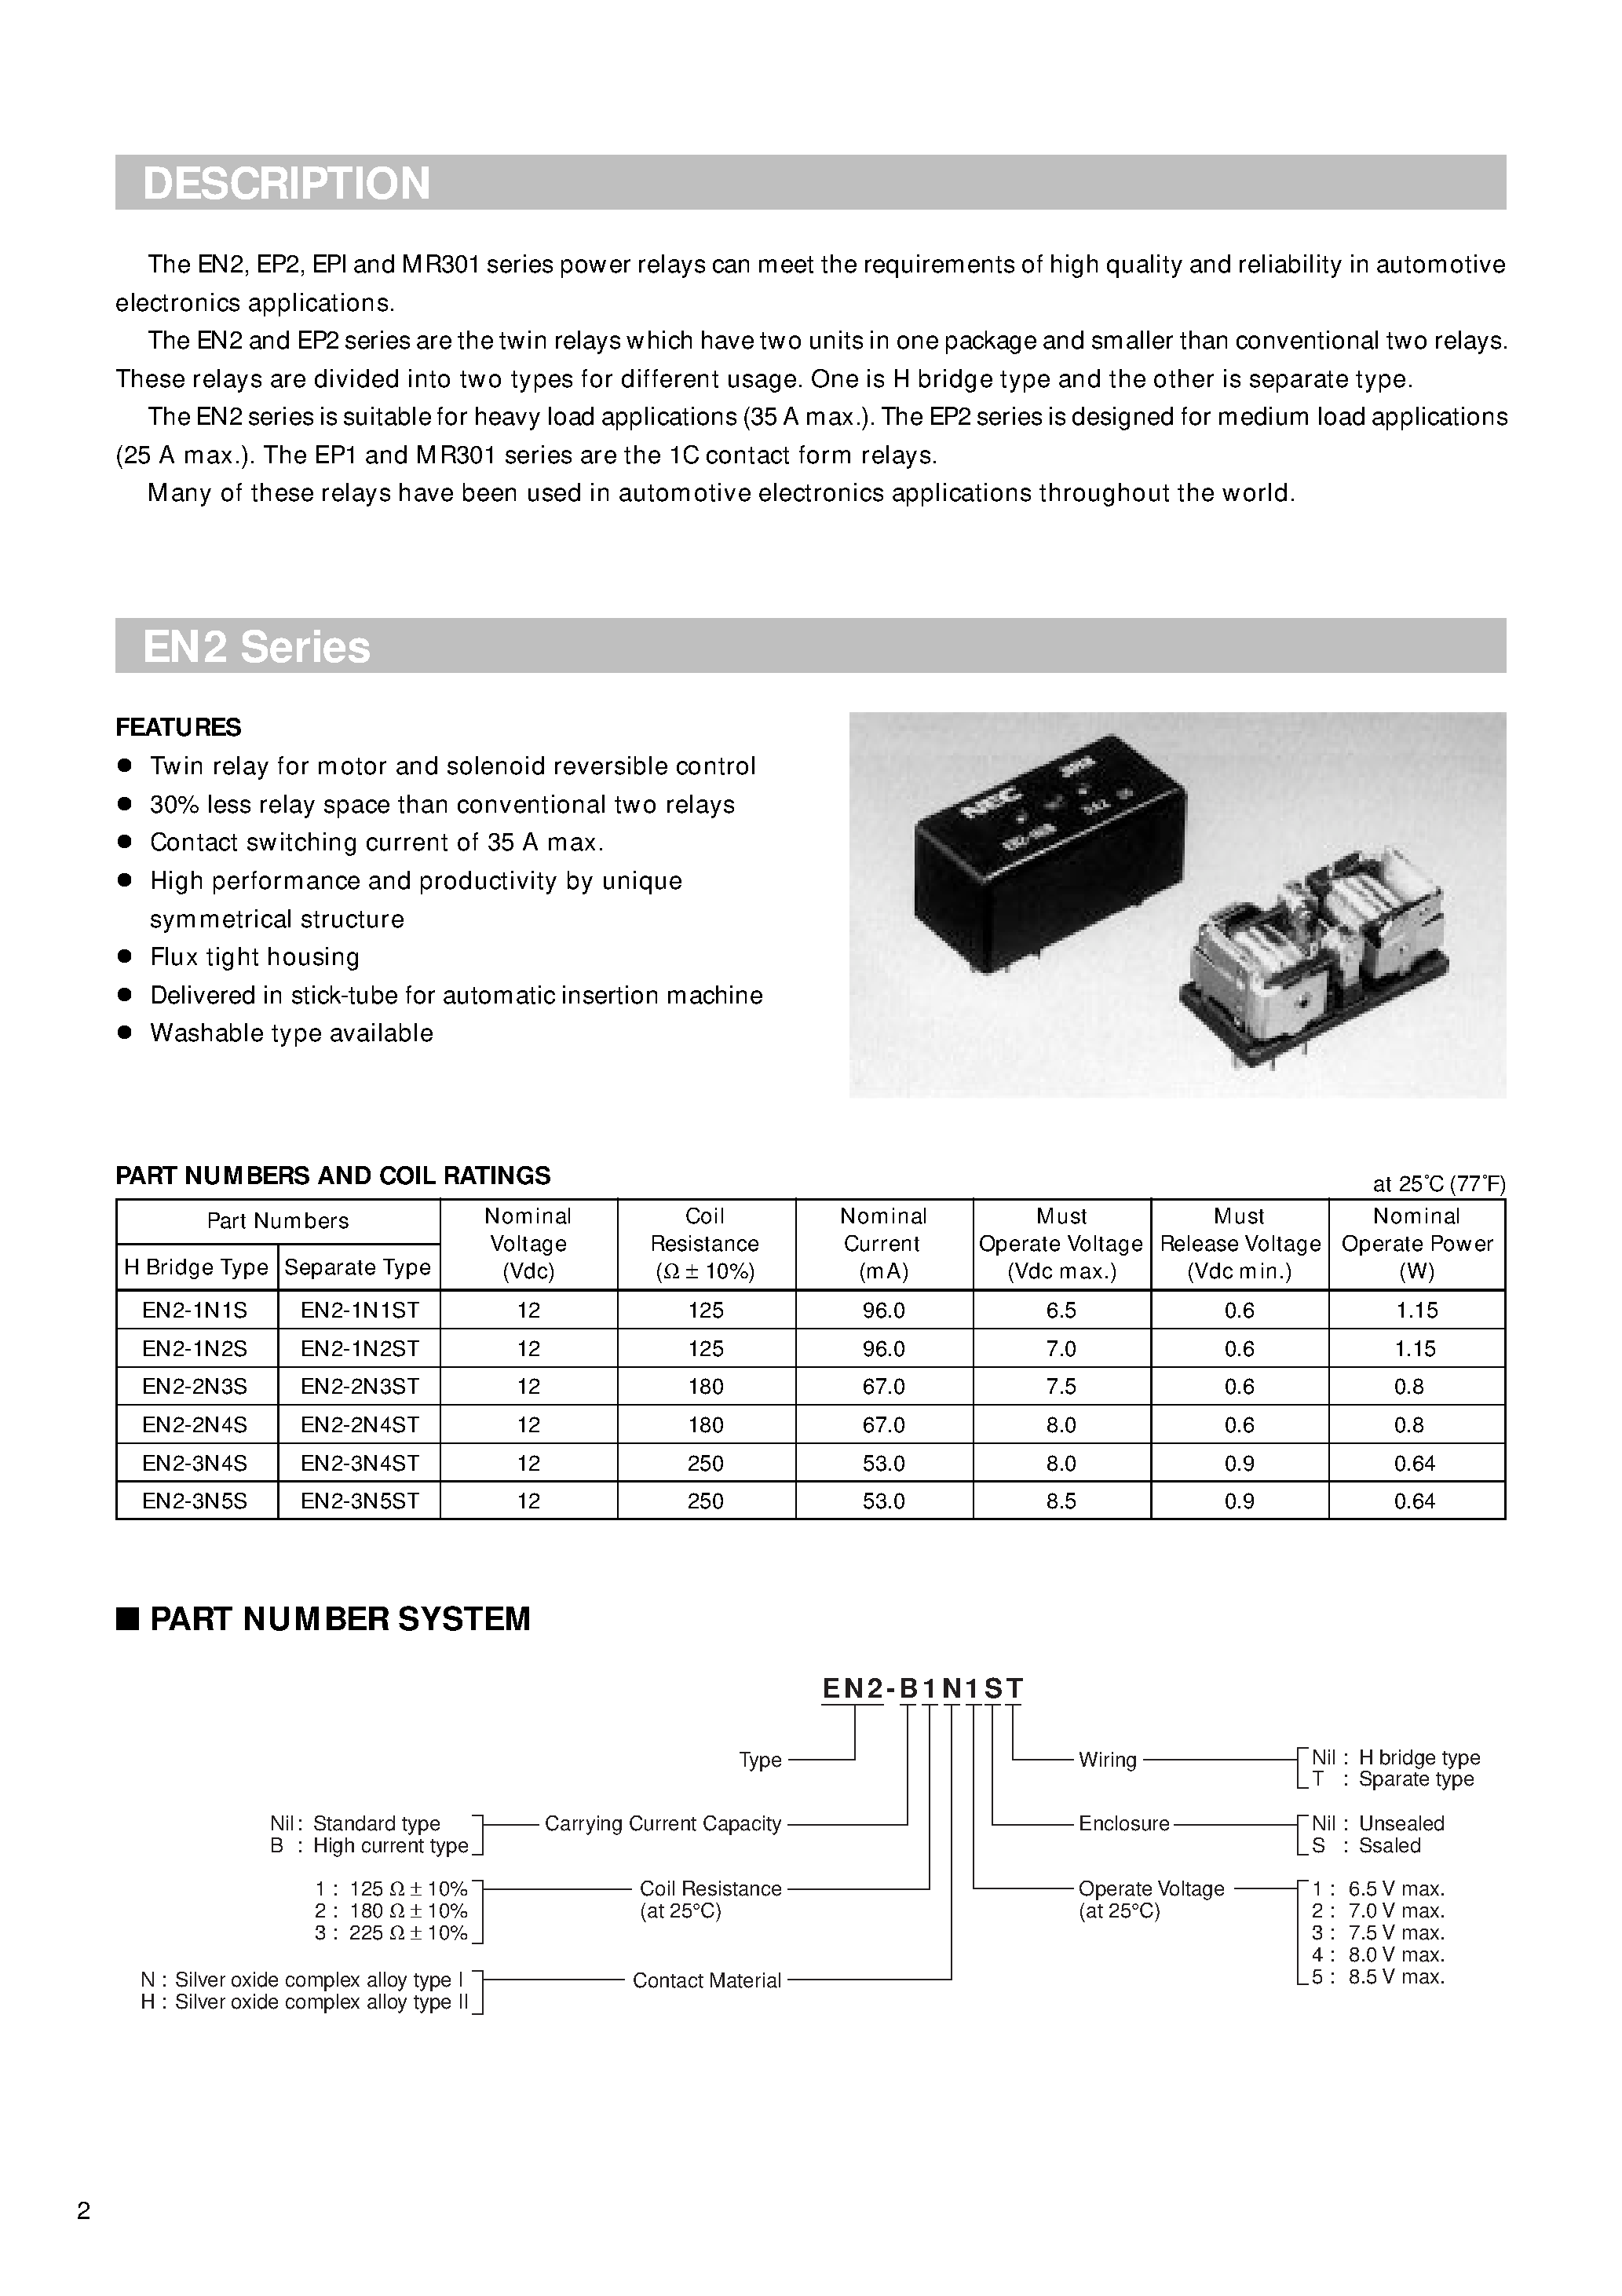 Datasheet EN2-1N3T - Twin relay for motor and solenoid reversible control page 2